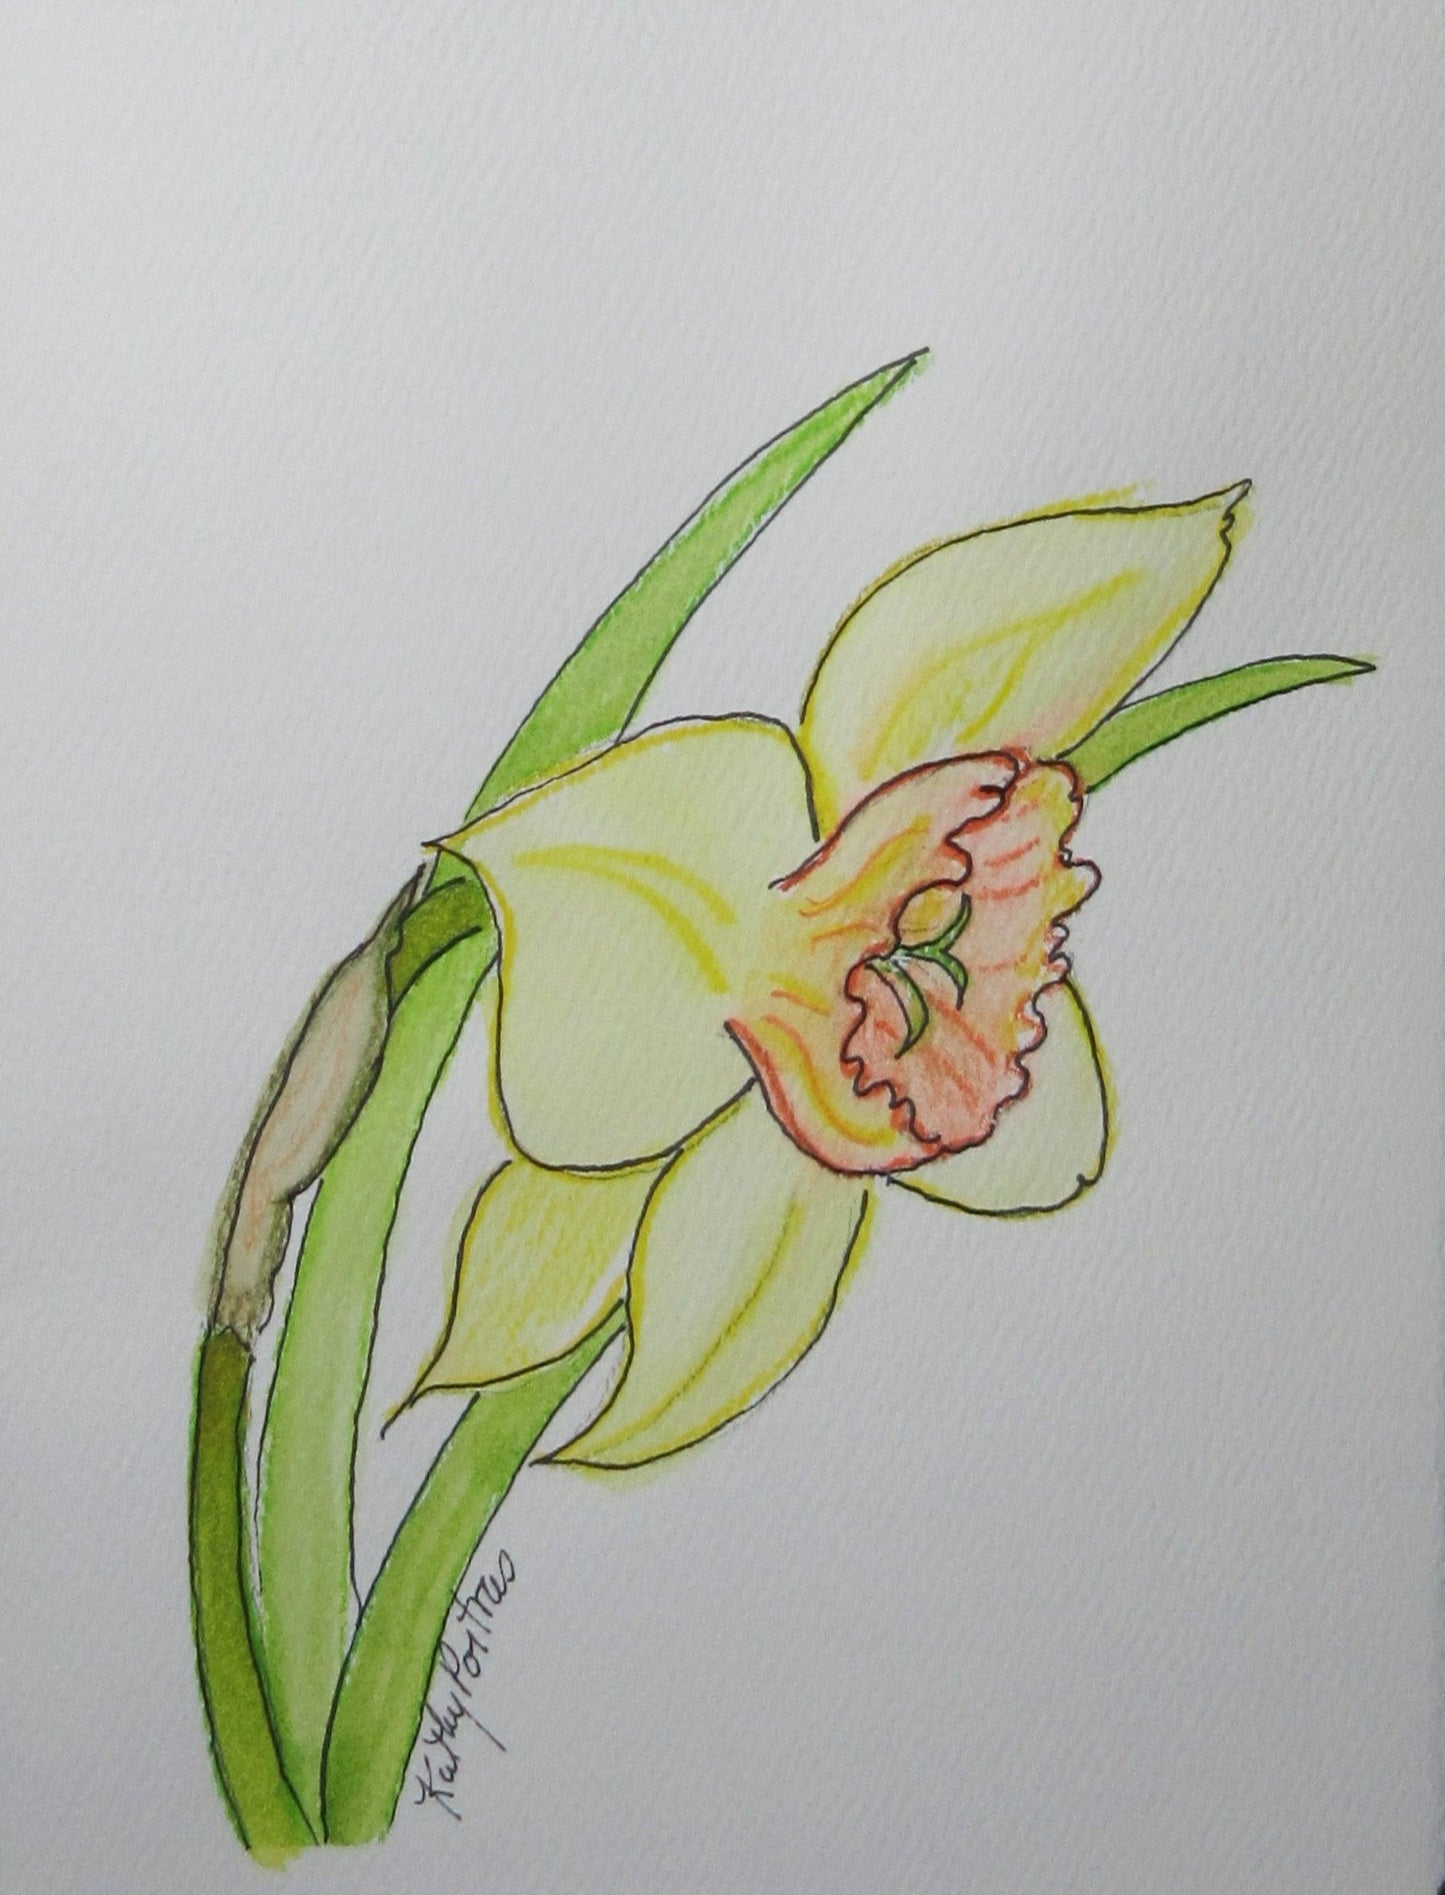 Daffodil Celebration B 5 x7 inch watercolor and ink